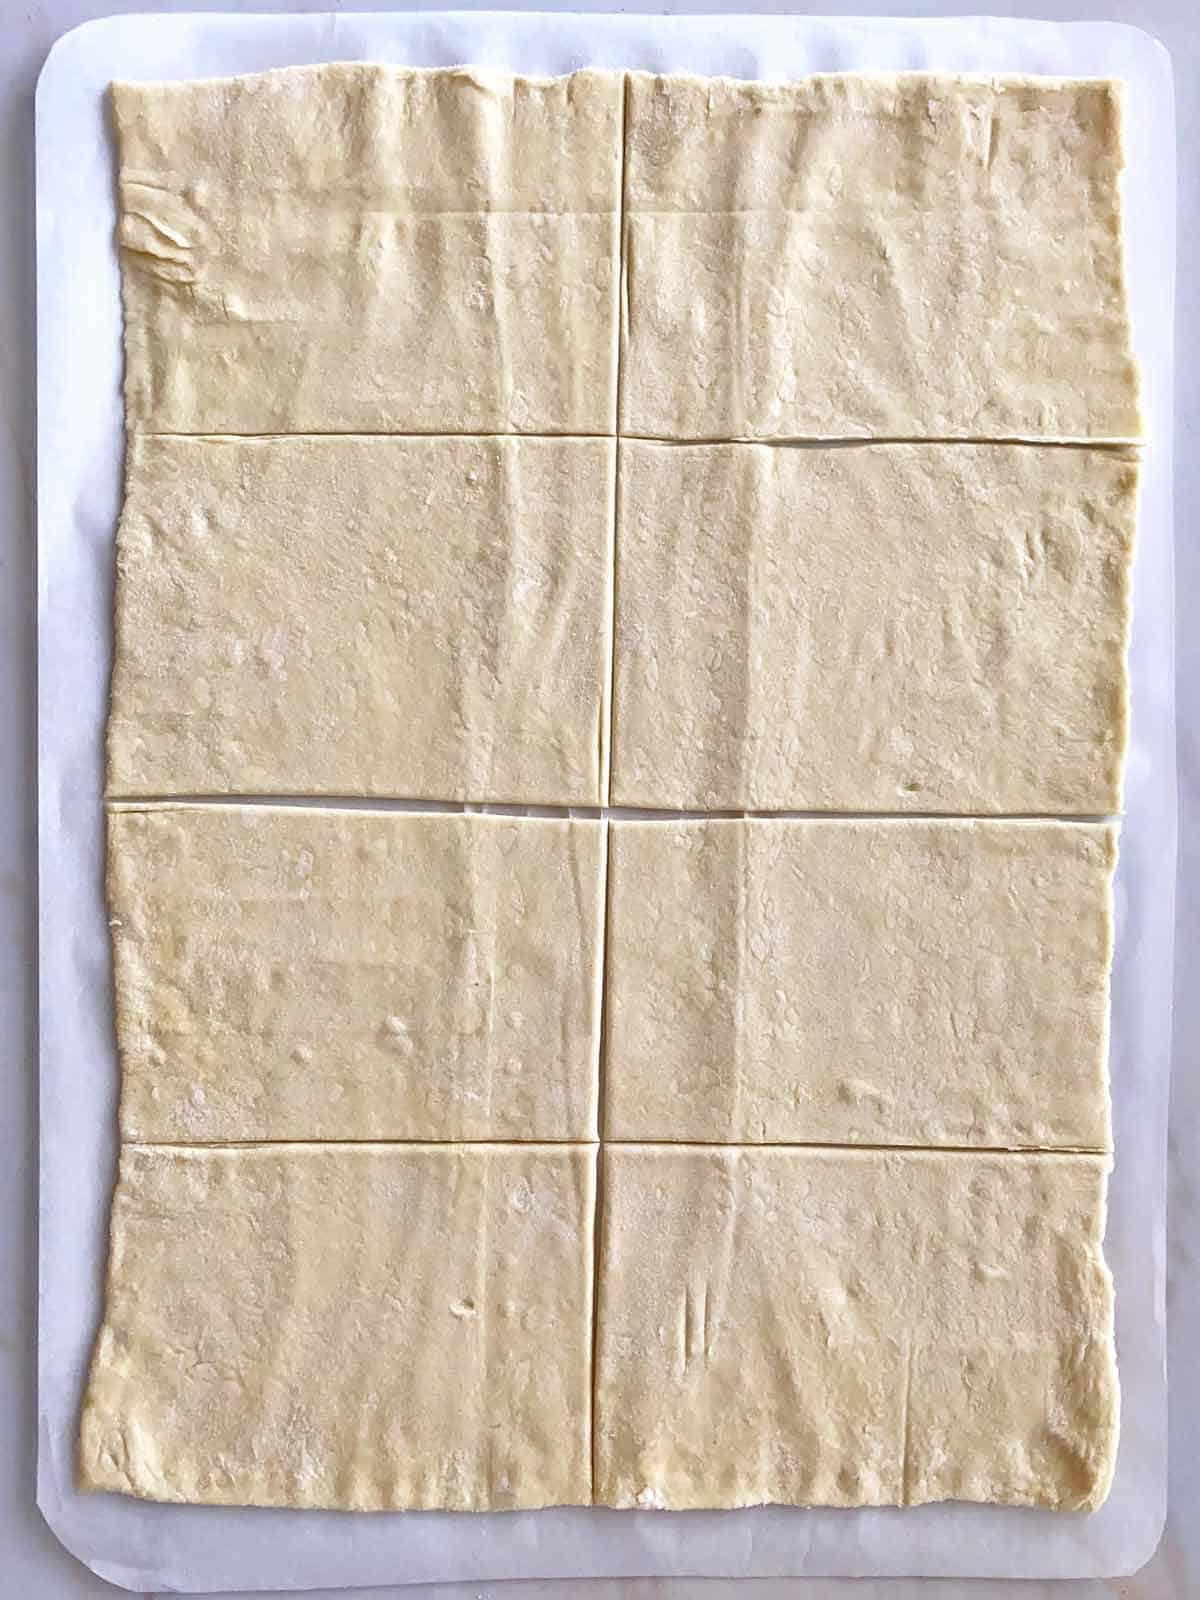 A sheet of puff pastry rolled out and cut in 8 rectangles.